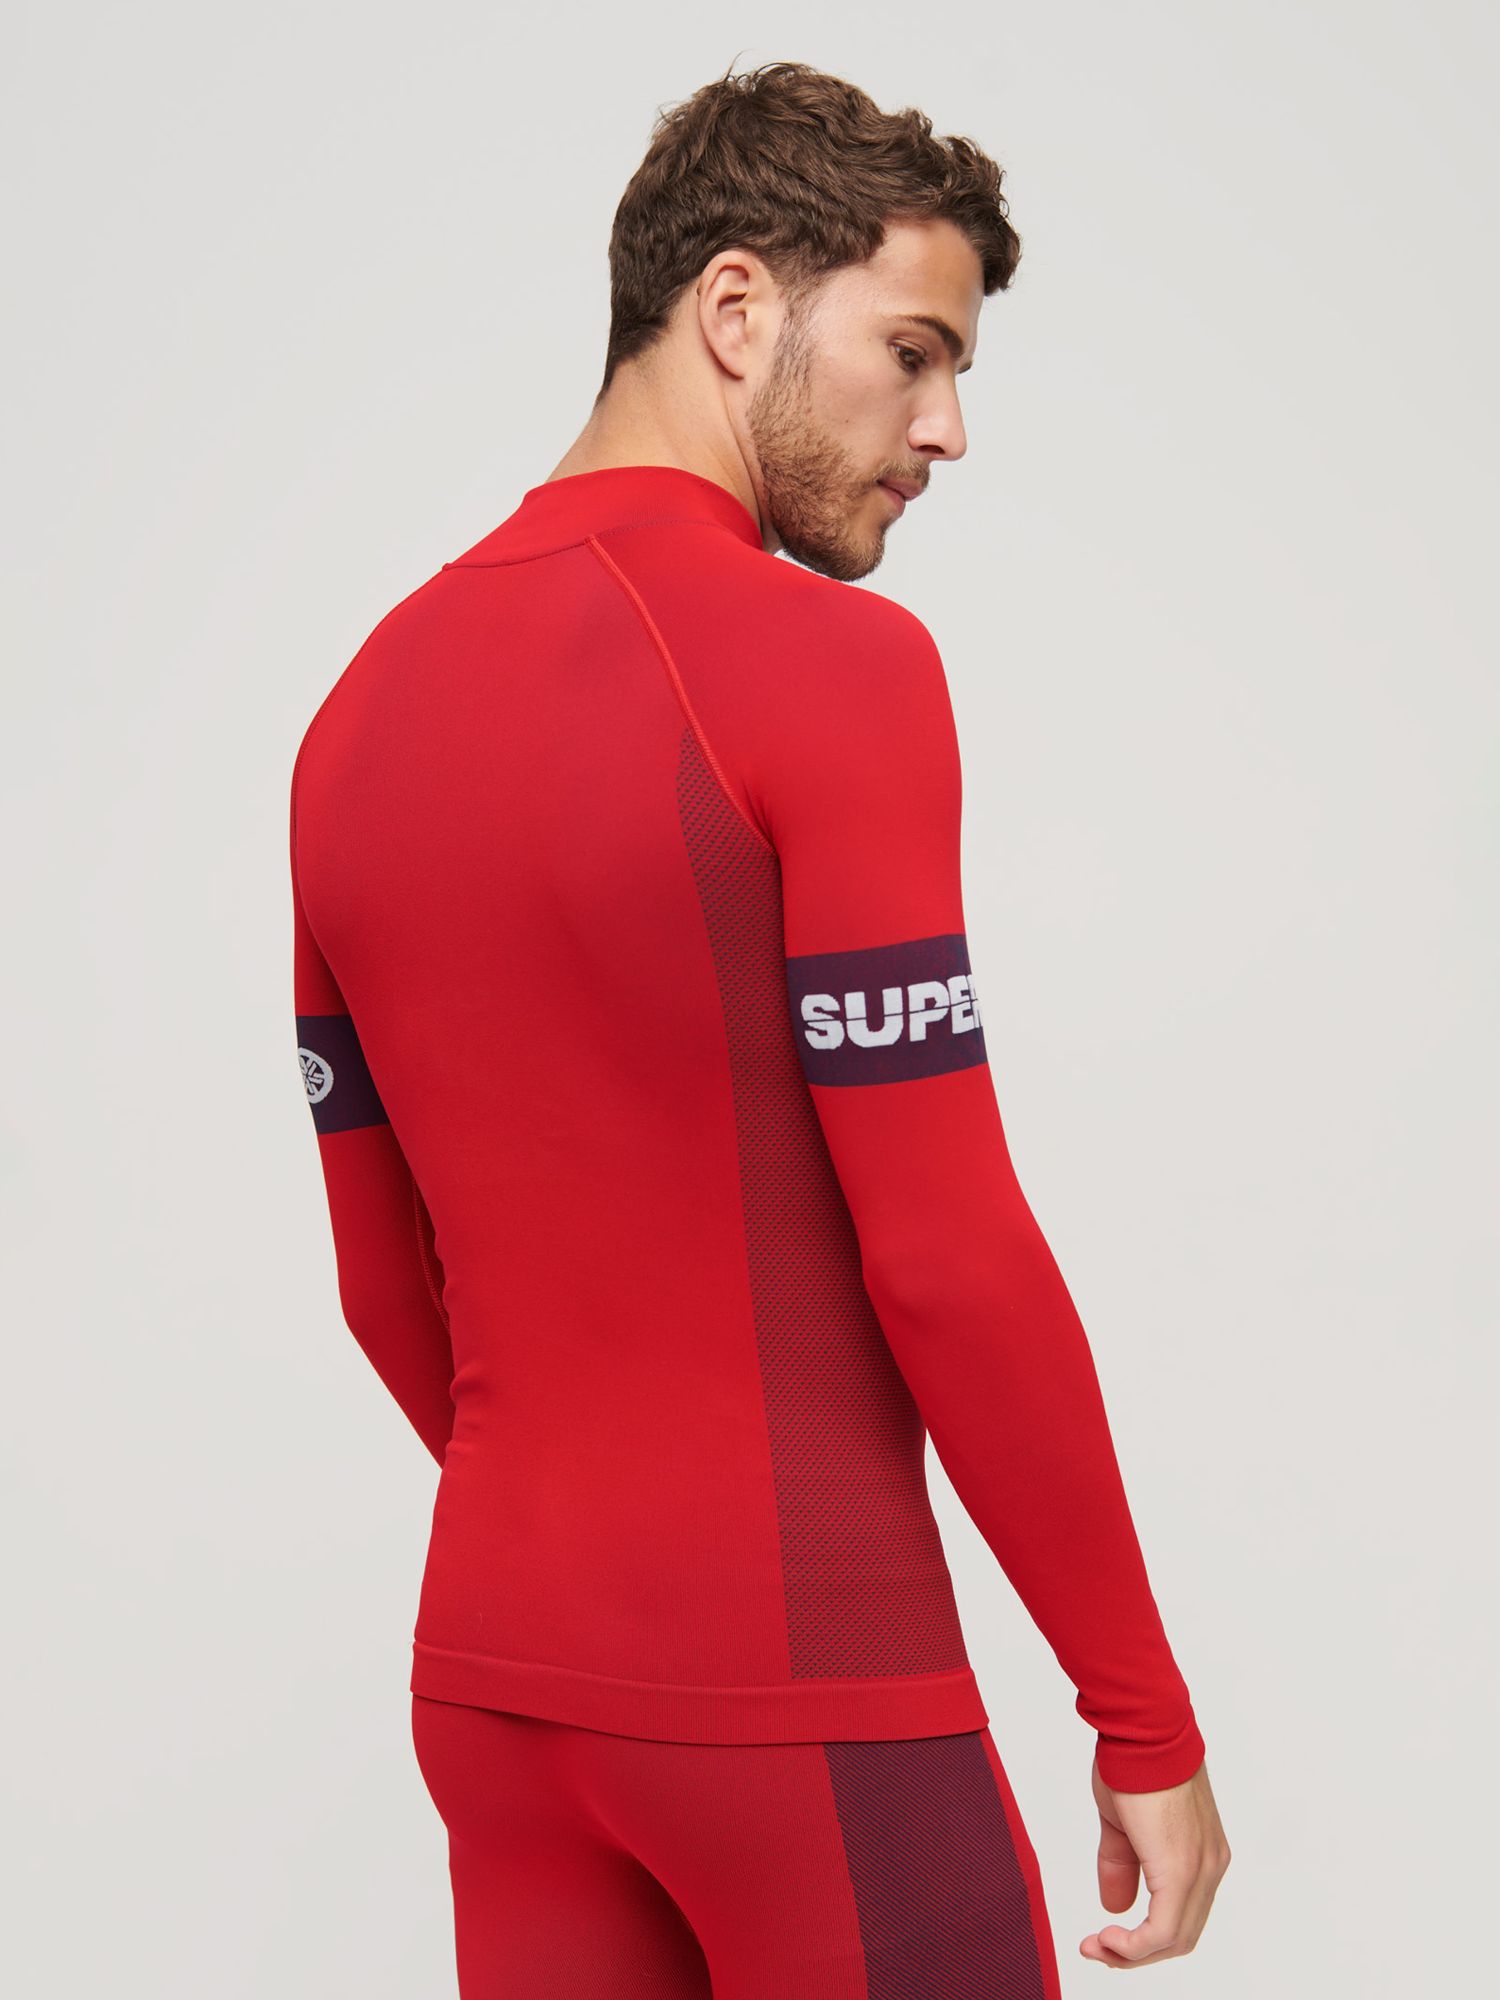 Superdry Seamless 1/4 Zip Baselayer Top, Hike Red, M